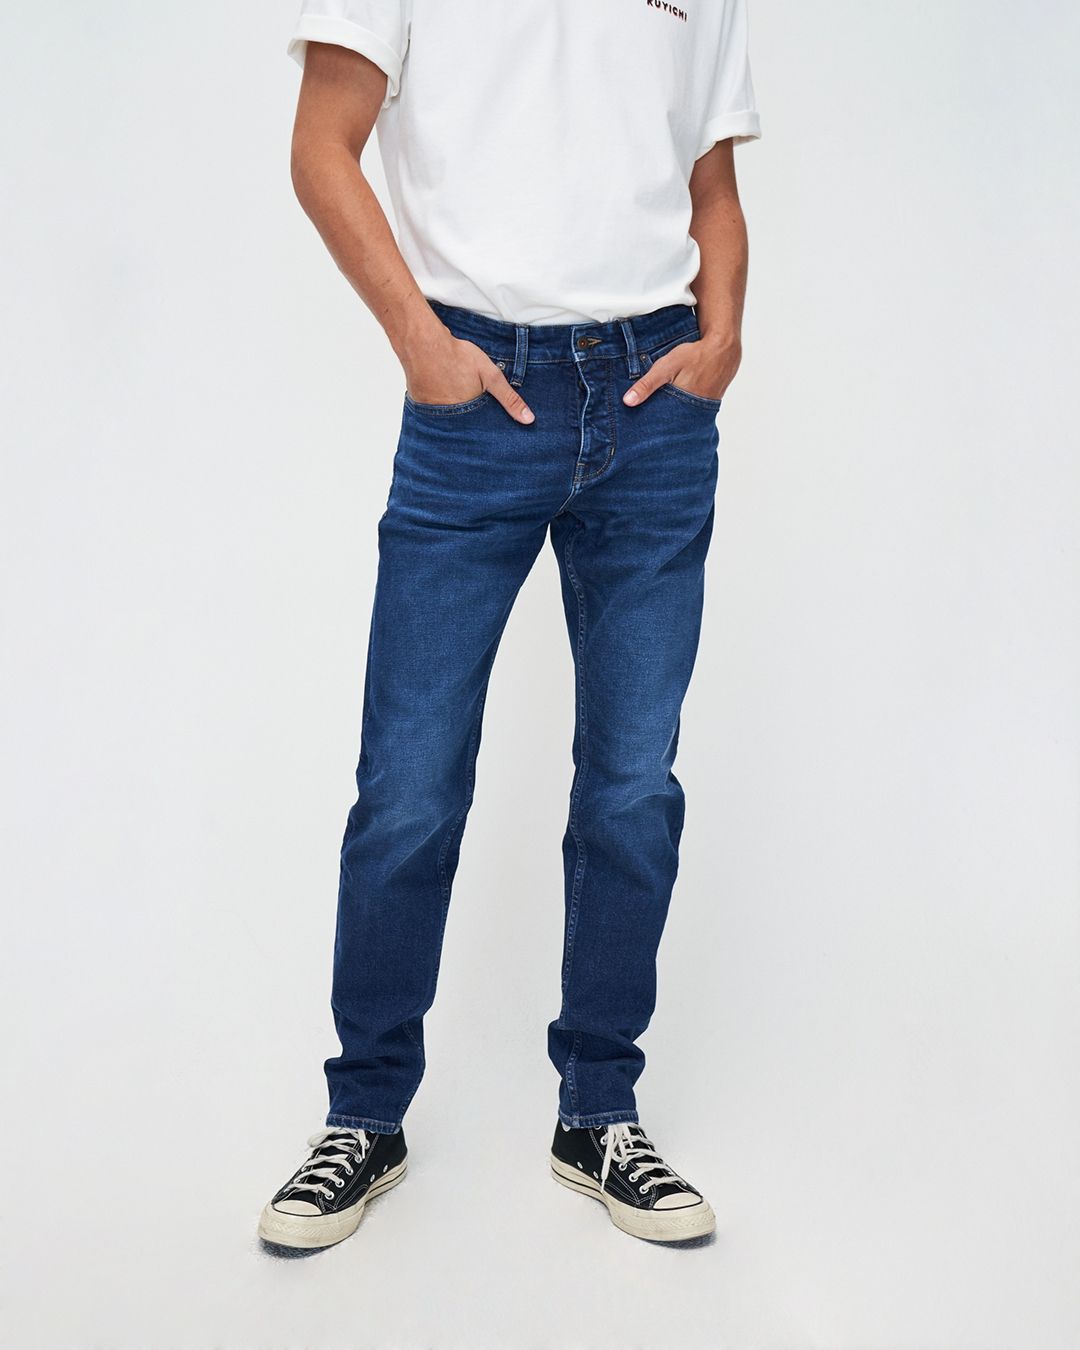 Jim tapered jeans faded indigo